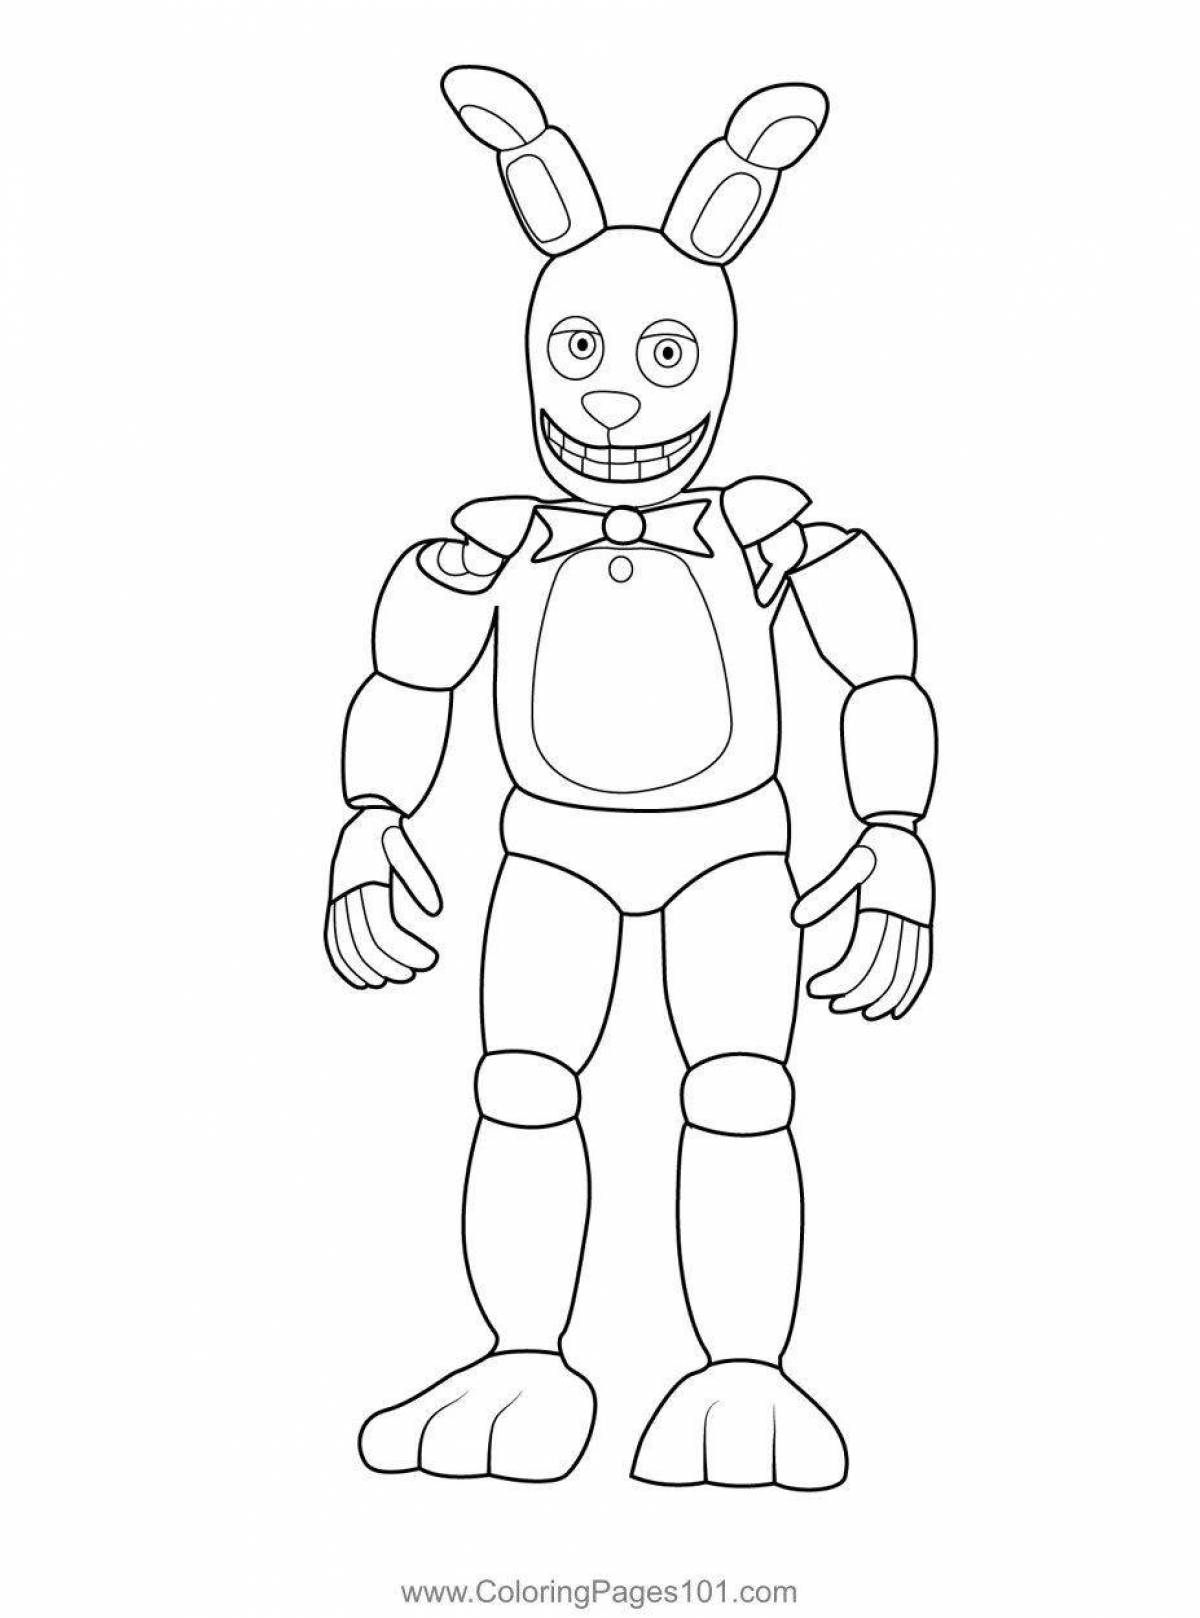 Animated fnaf 1 bonnie coloring page